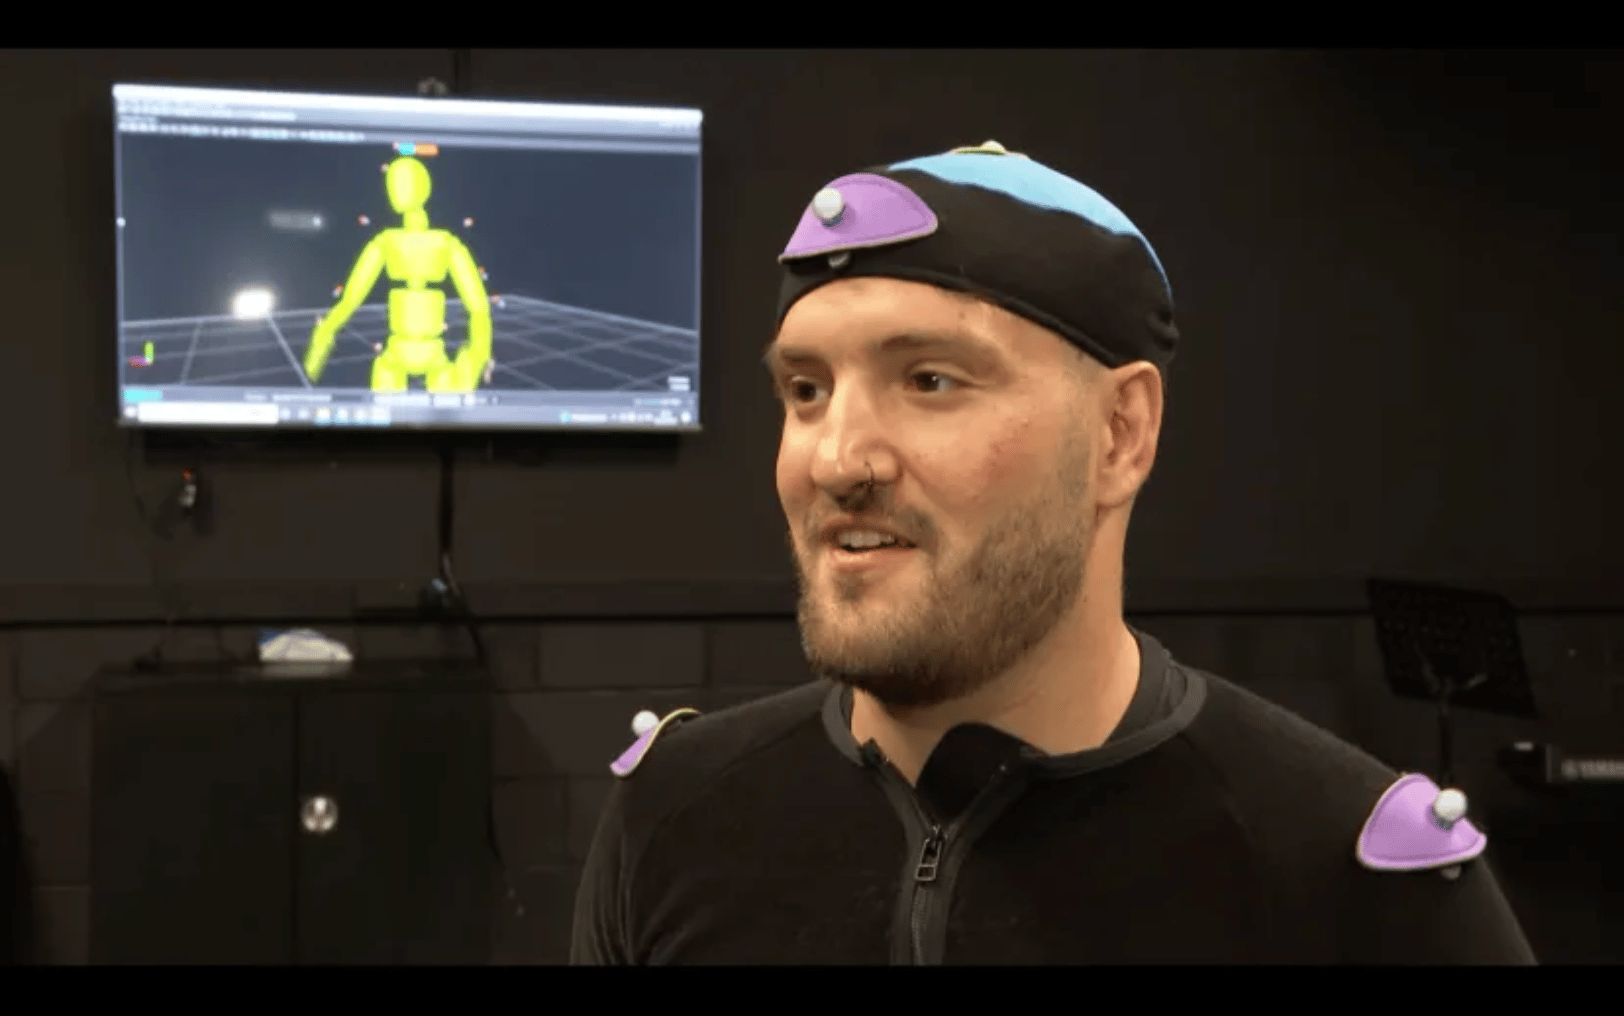 Andy Dickenson with motion capture suit on talking to ITV interviewer